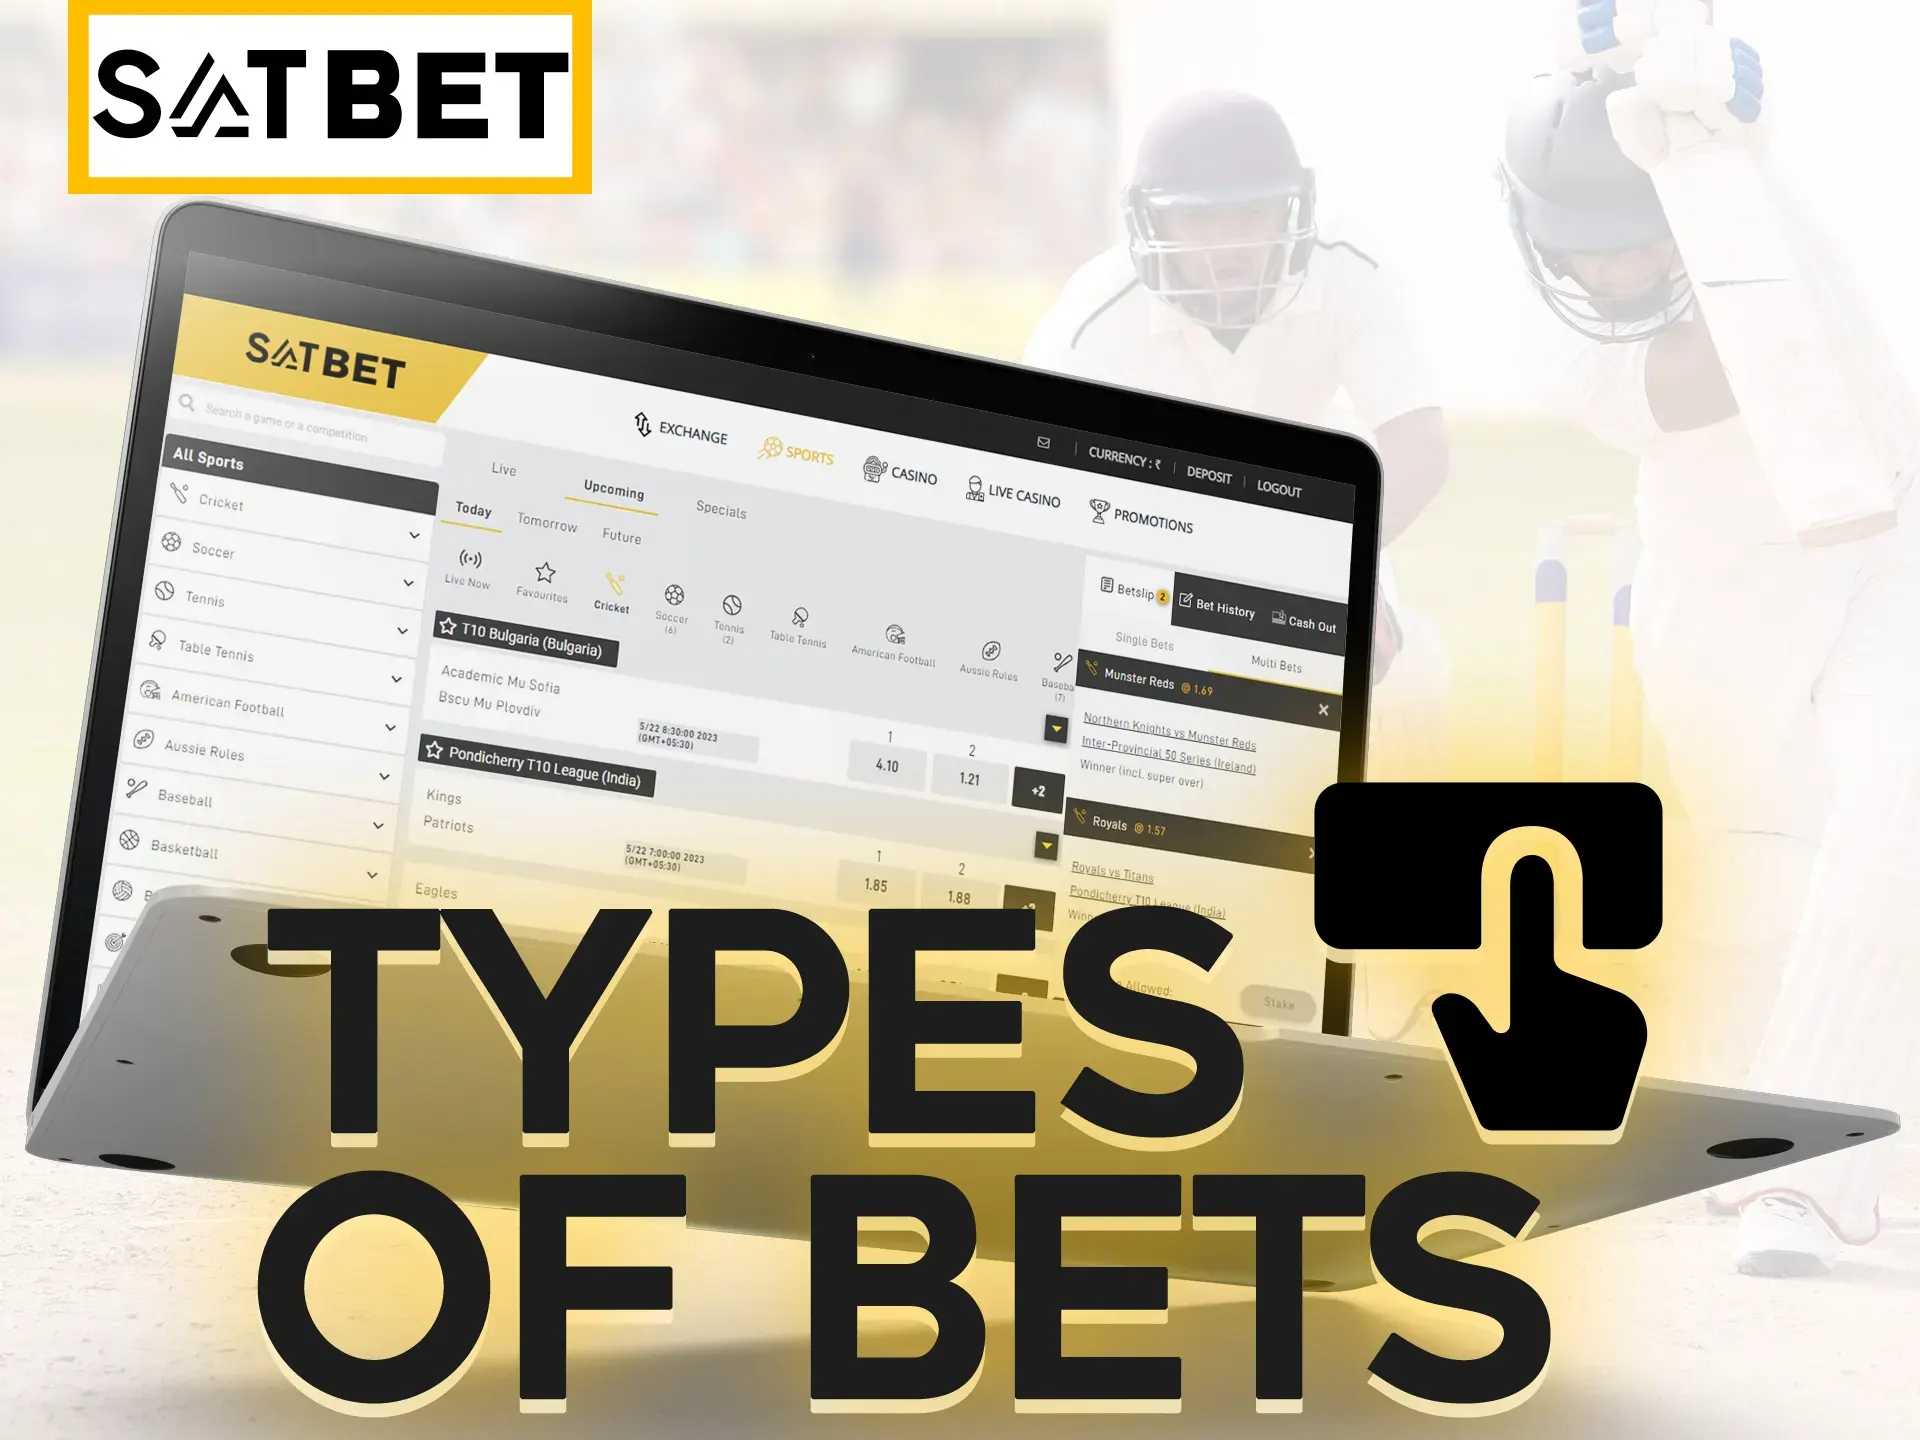 Try each type of bets at Satbet.